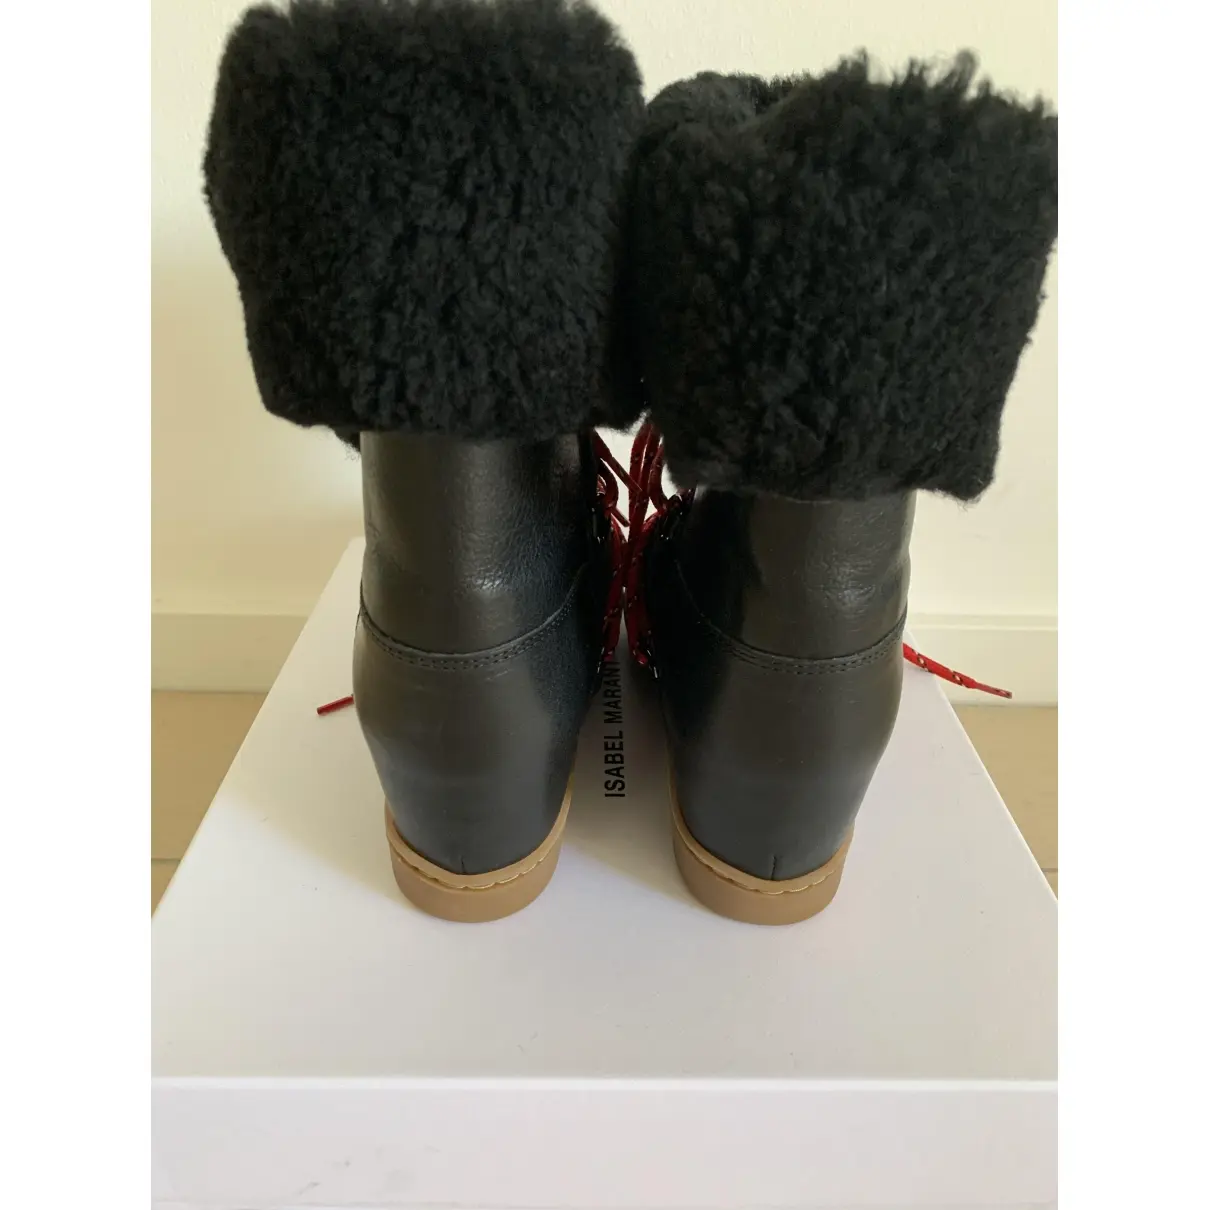 Buy Isabel Marant Nowles leather snow boots online